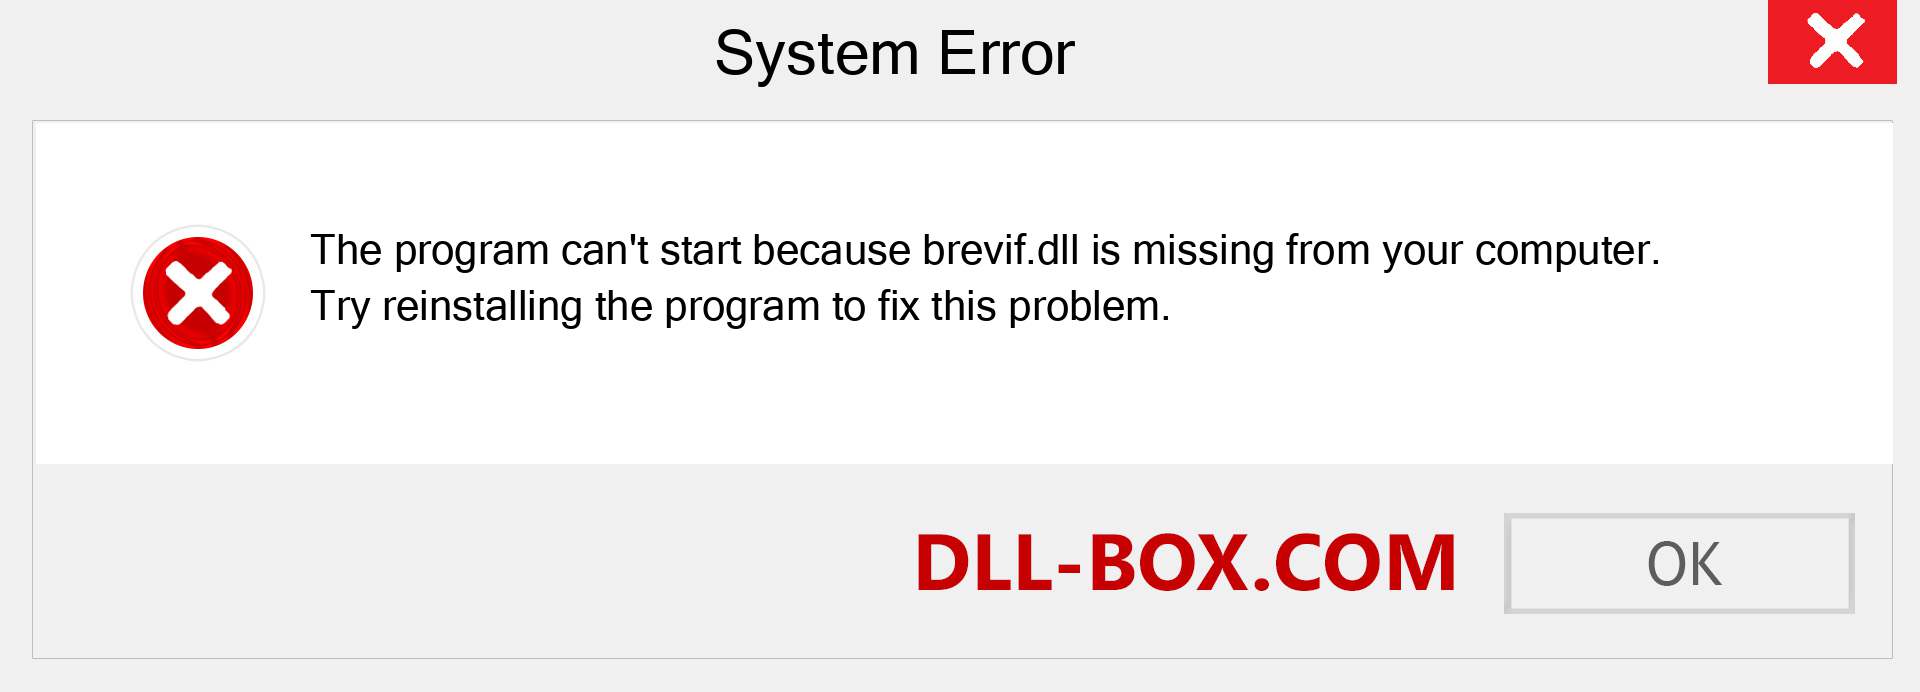  brevif.dll file is missing?. Download for Windows 7, 8, 10 - Fix  brevif dll Missing Error on Windows, photos, images